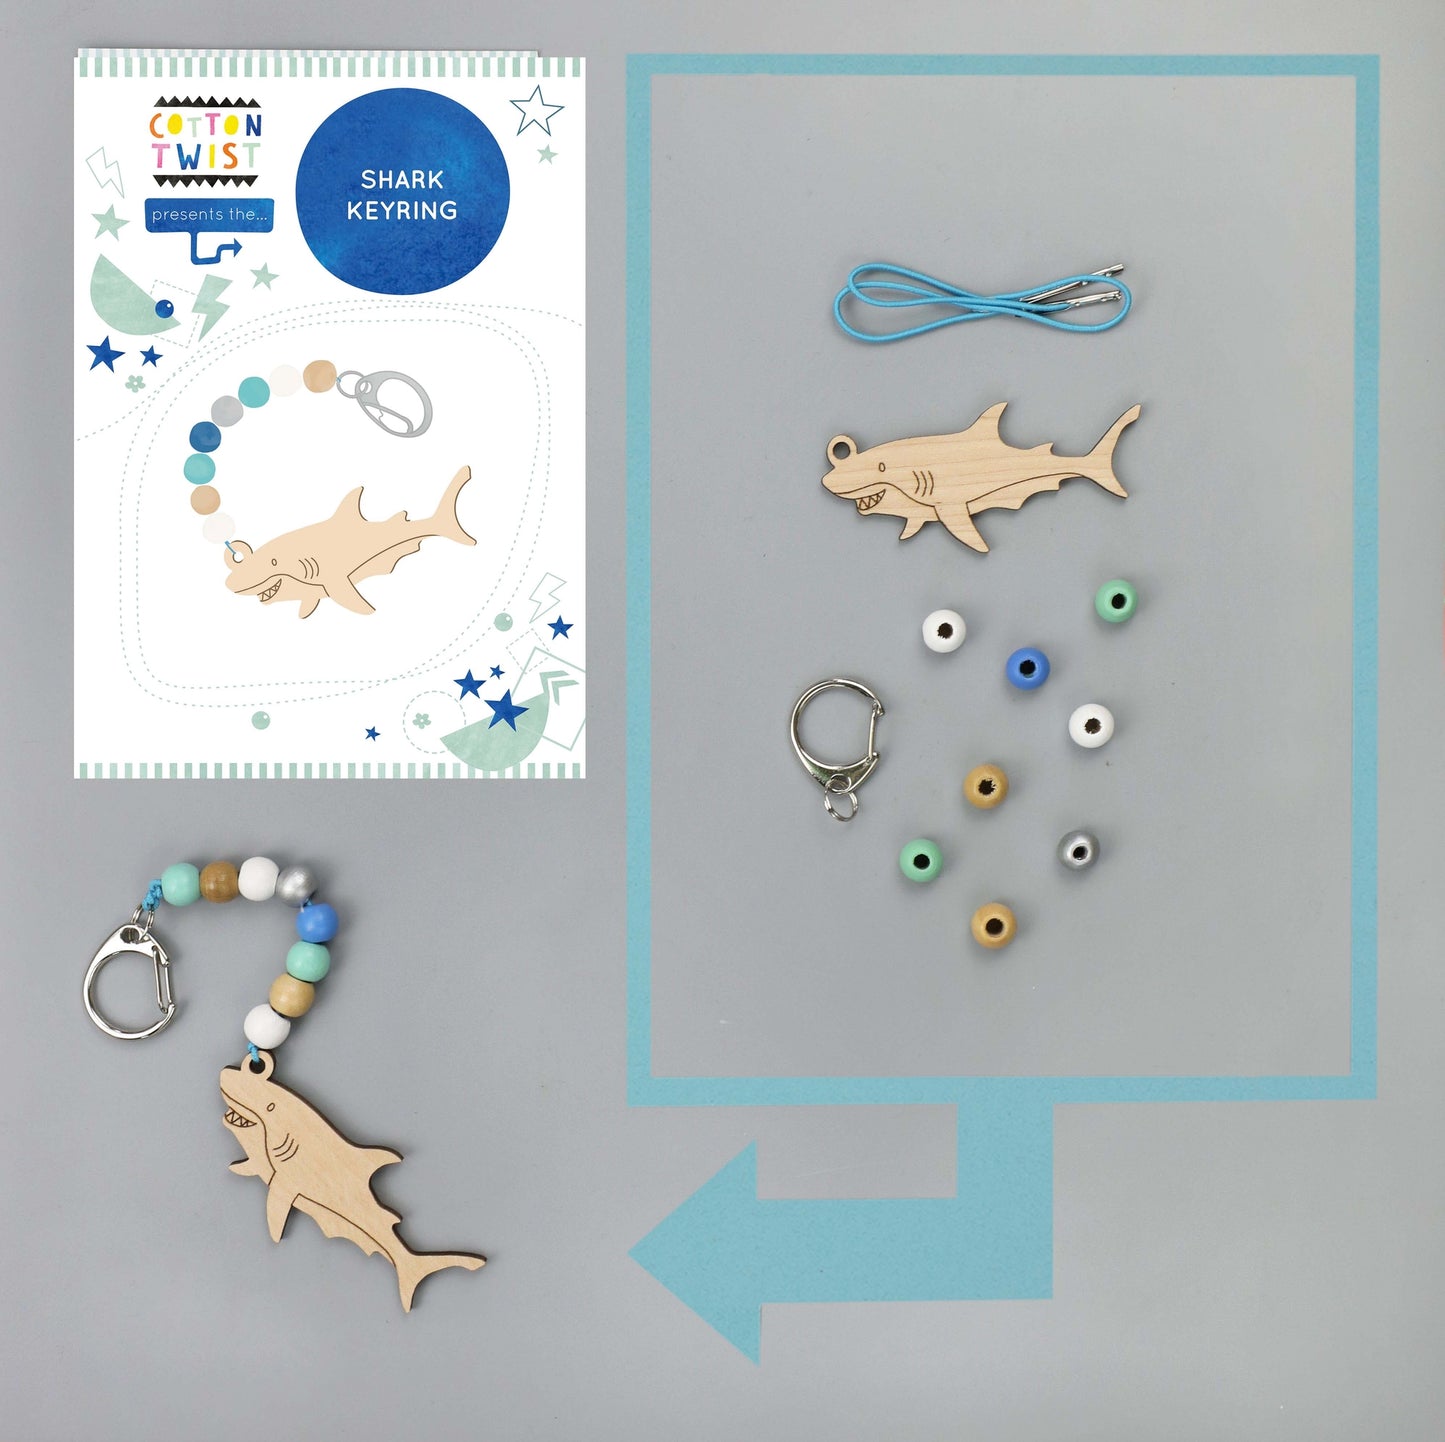 Children can construct their solid maple wood shark keyring using the elastic &amp; spherical beads provided. The elastic comes with metal ends to help children add beads with ease, & the keyring mechanism has a simple catch. Each kit is plastic free & lovingly assembled by hand.